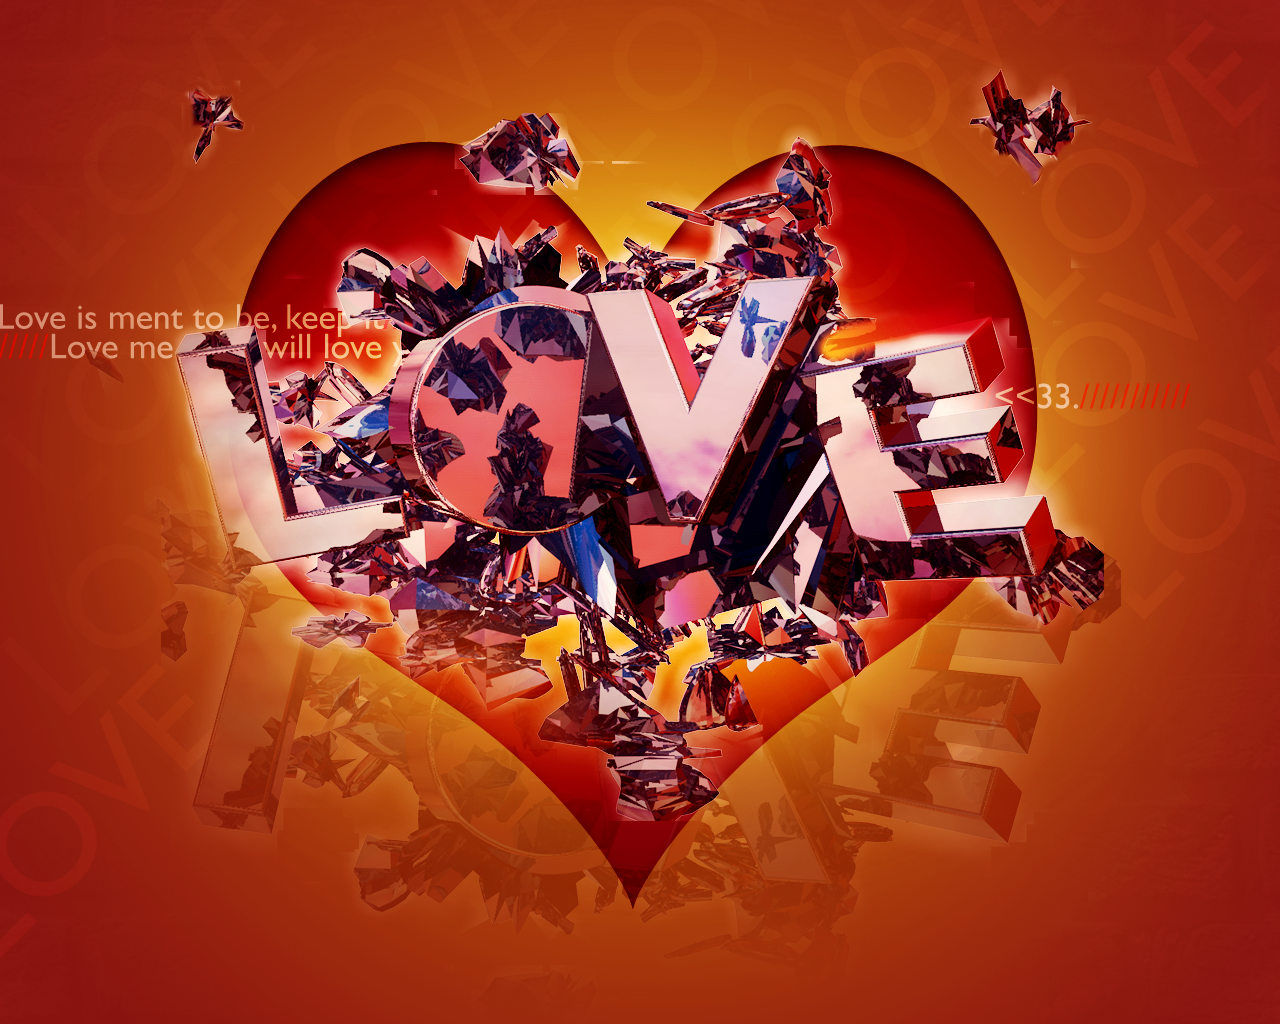 New love photos wallpaper, new love wallpaper | Simple Wallpapers